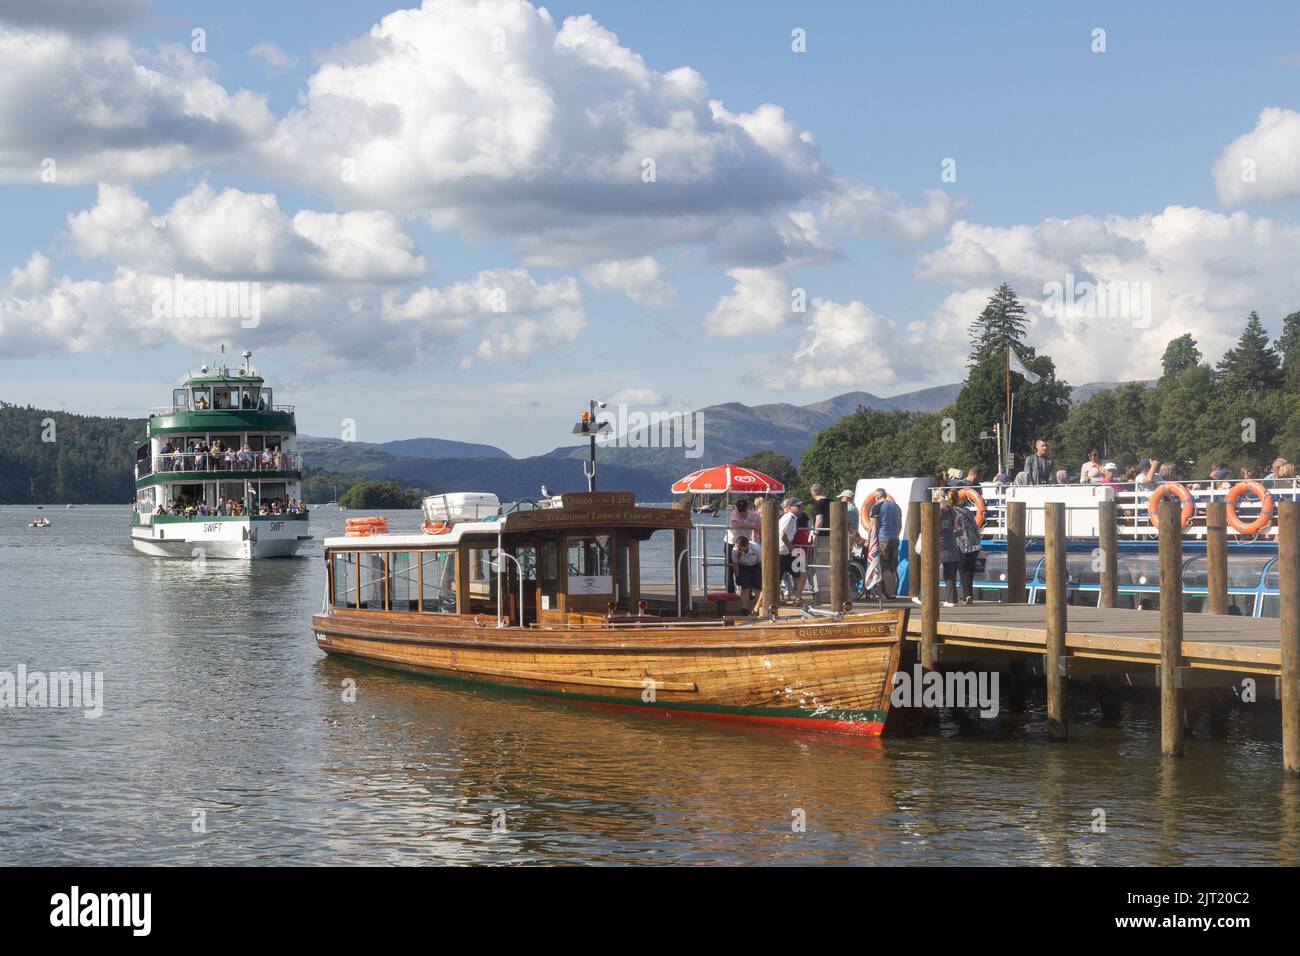 Lake Windermere Cumbria 27th August 2022 .UK Weather Vessels of all sizes & age busy with tourist make the most of the Bank Holiday weekend weather. The Queen of The Lake wooden vessel built 1949 Credit: Gordon Shoosmith/Alamy Live News Stock Photo